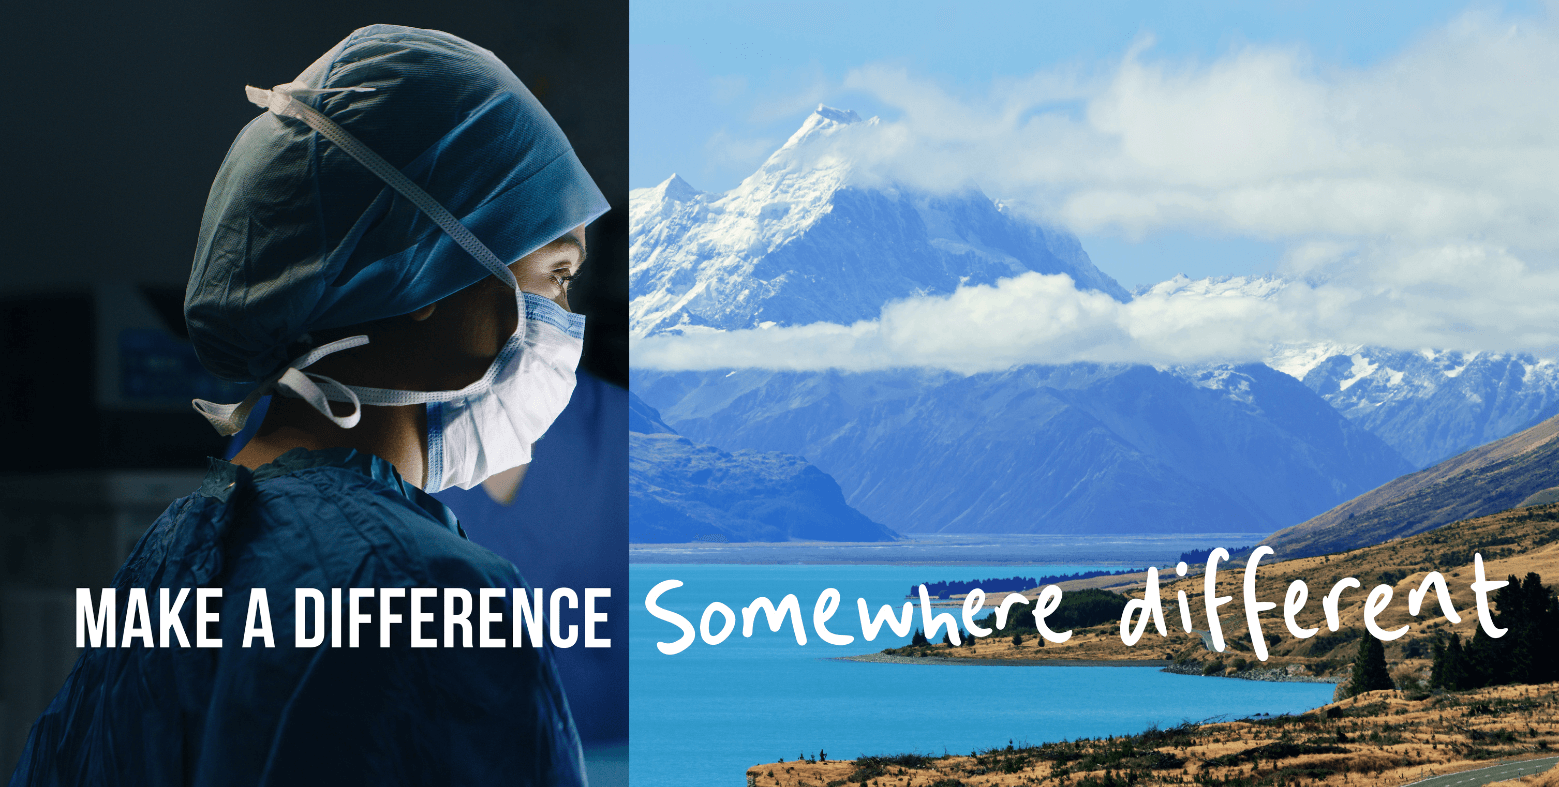 Healthcare professional makes a difference somewhere different